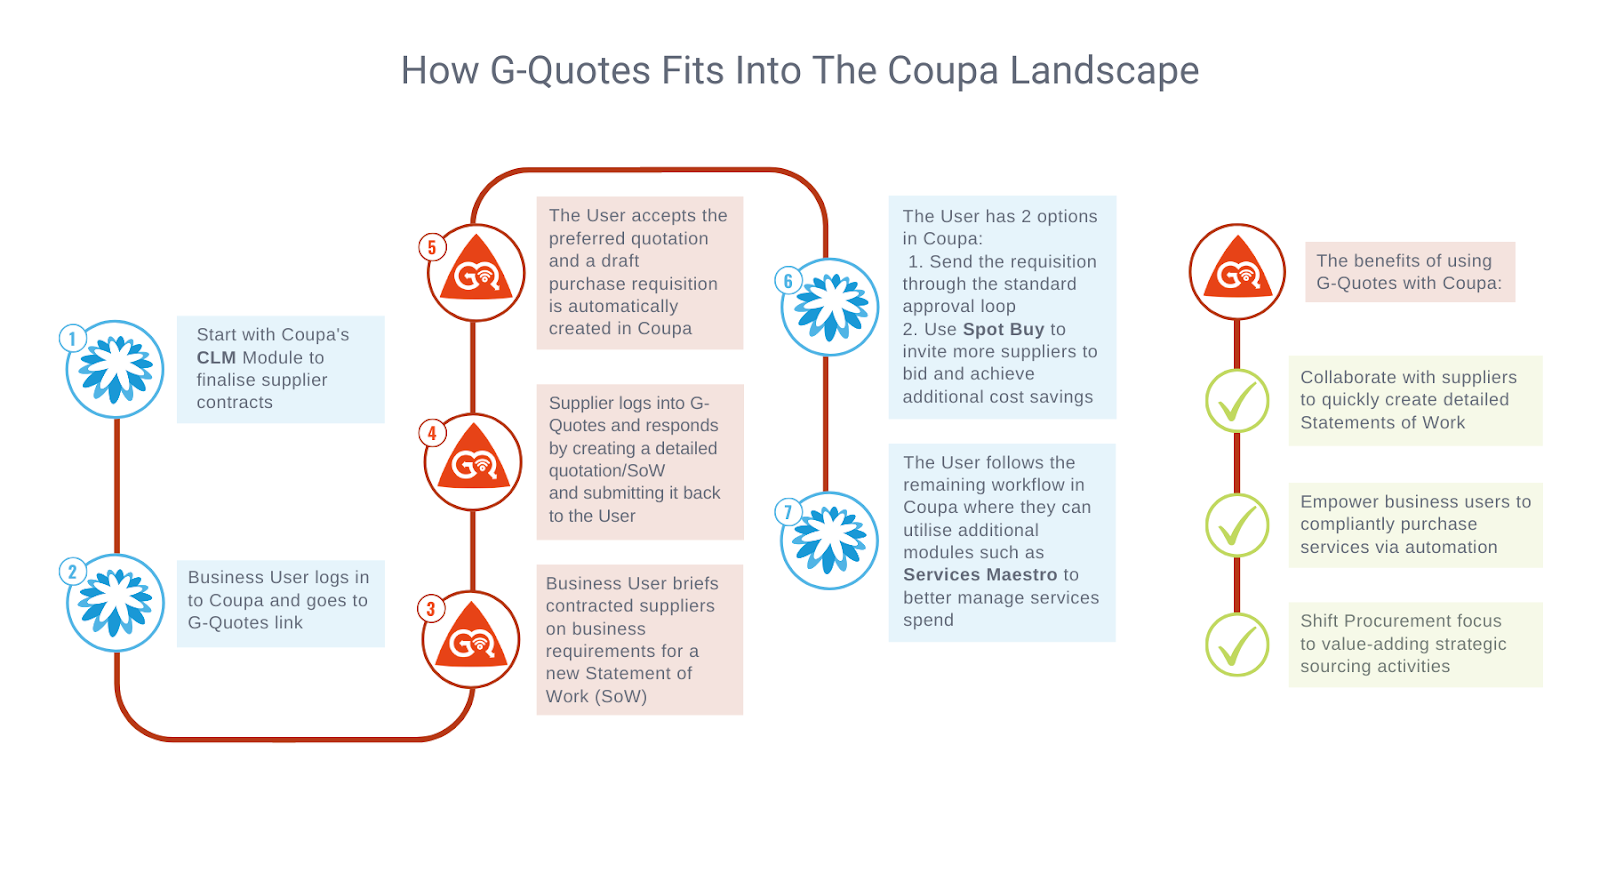 How G-Quotes Fits Into the Coupa Landscape